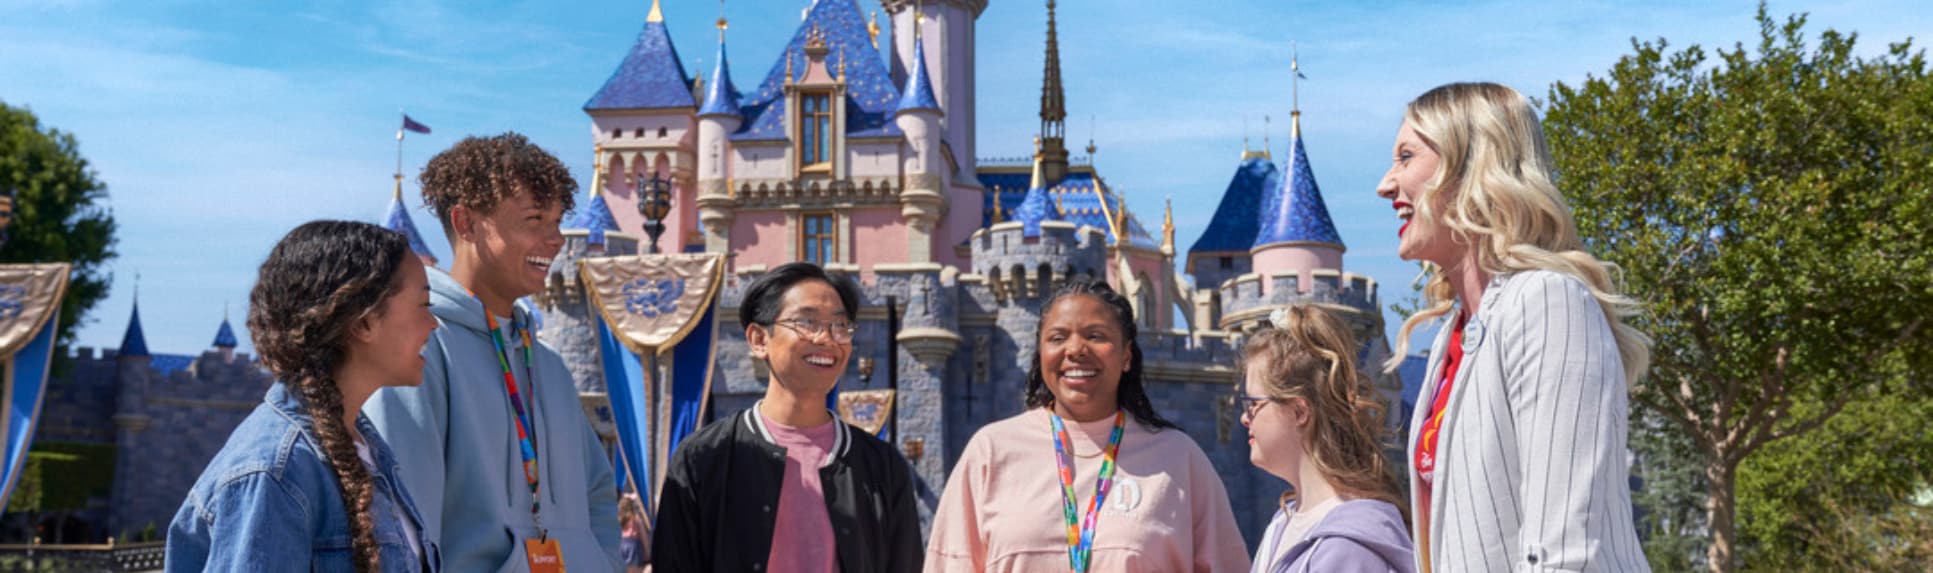 A Cast Member and 5 students stand in front of Sleeping Beauty Castle in Disneyland Park